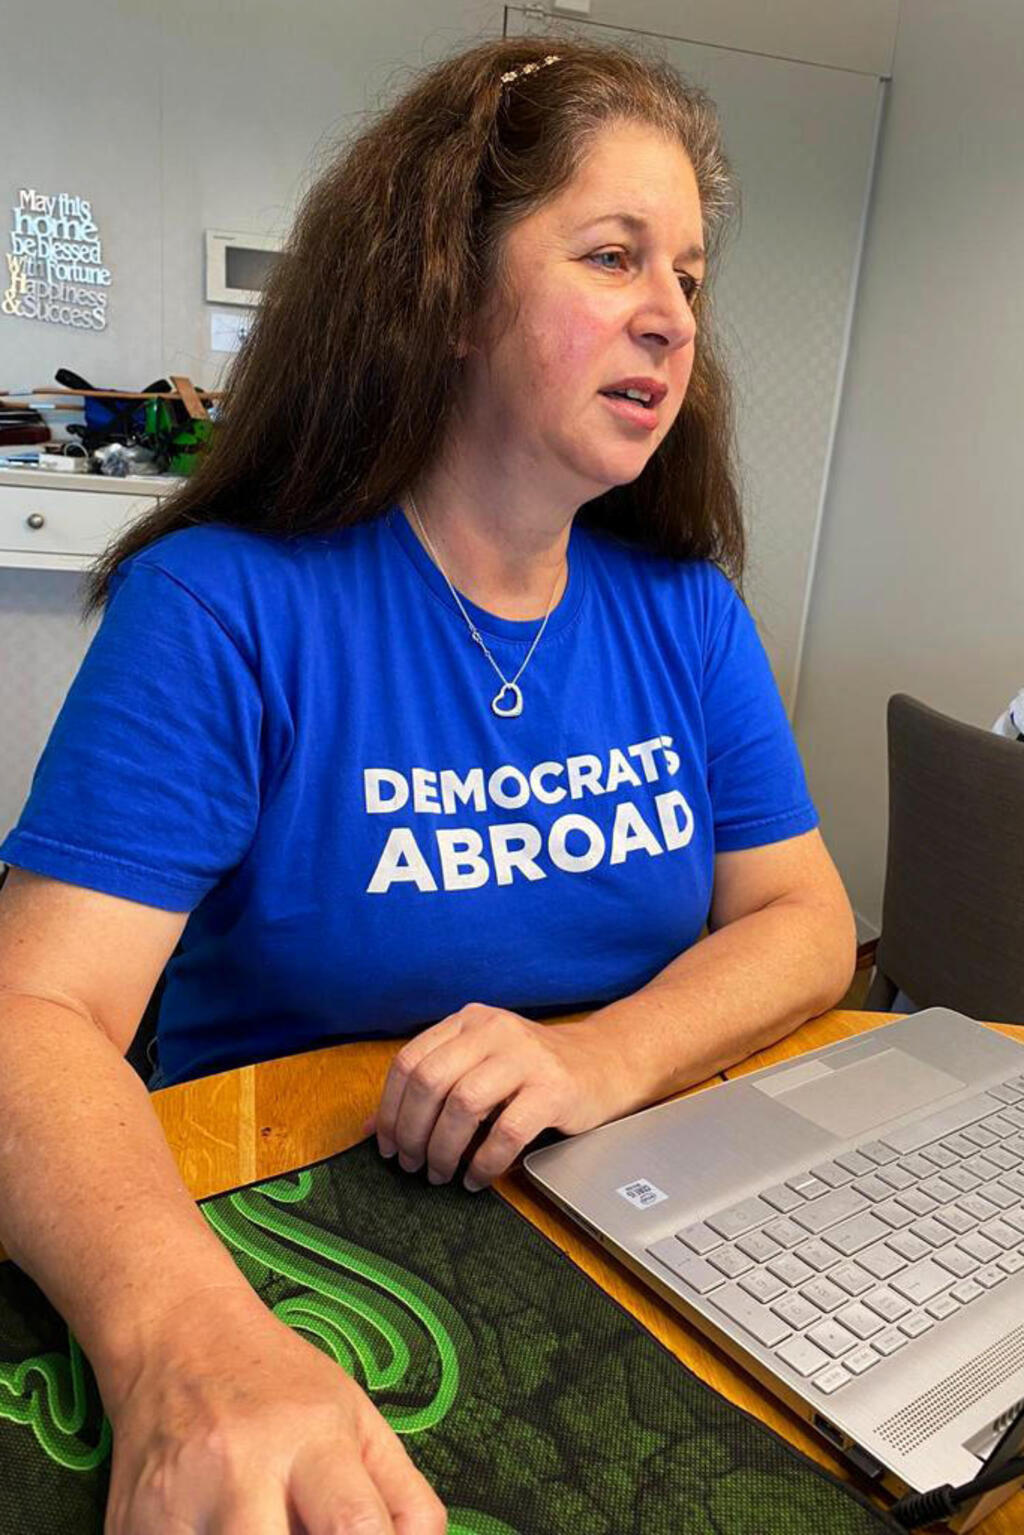 Heather Stone, chairperson of Democrats Abroad Israel, works on her computer during her interview with Reuters in Tel Aviv, Israel October 15, 2020 